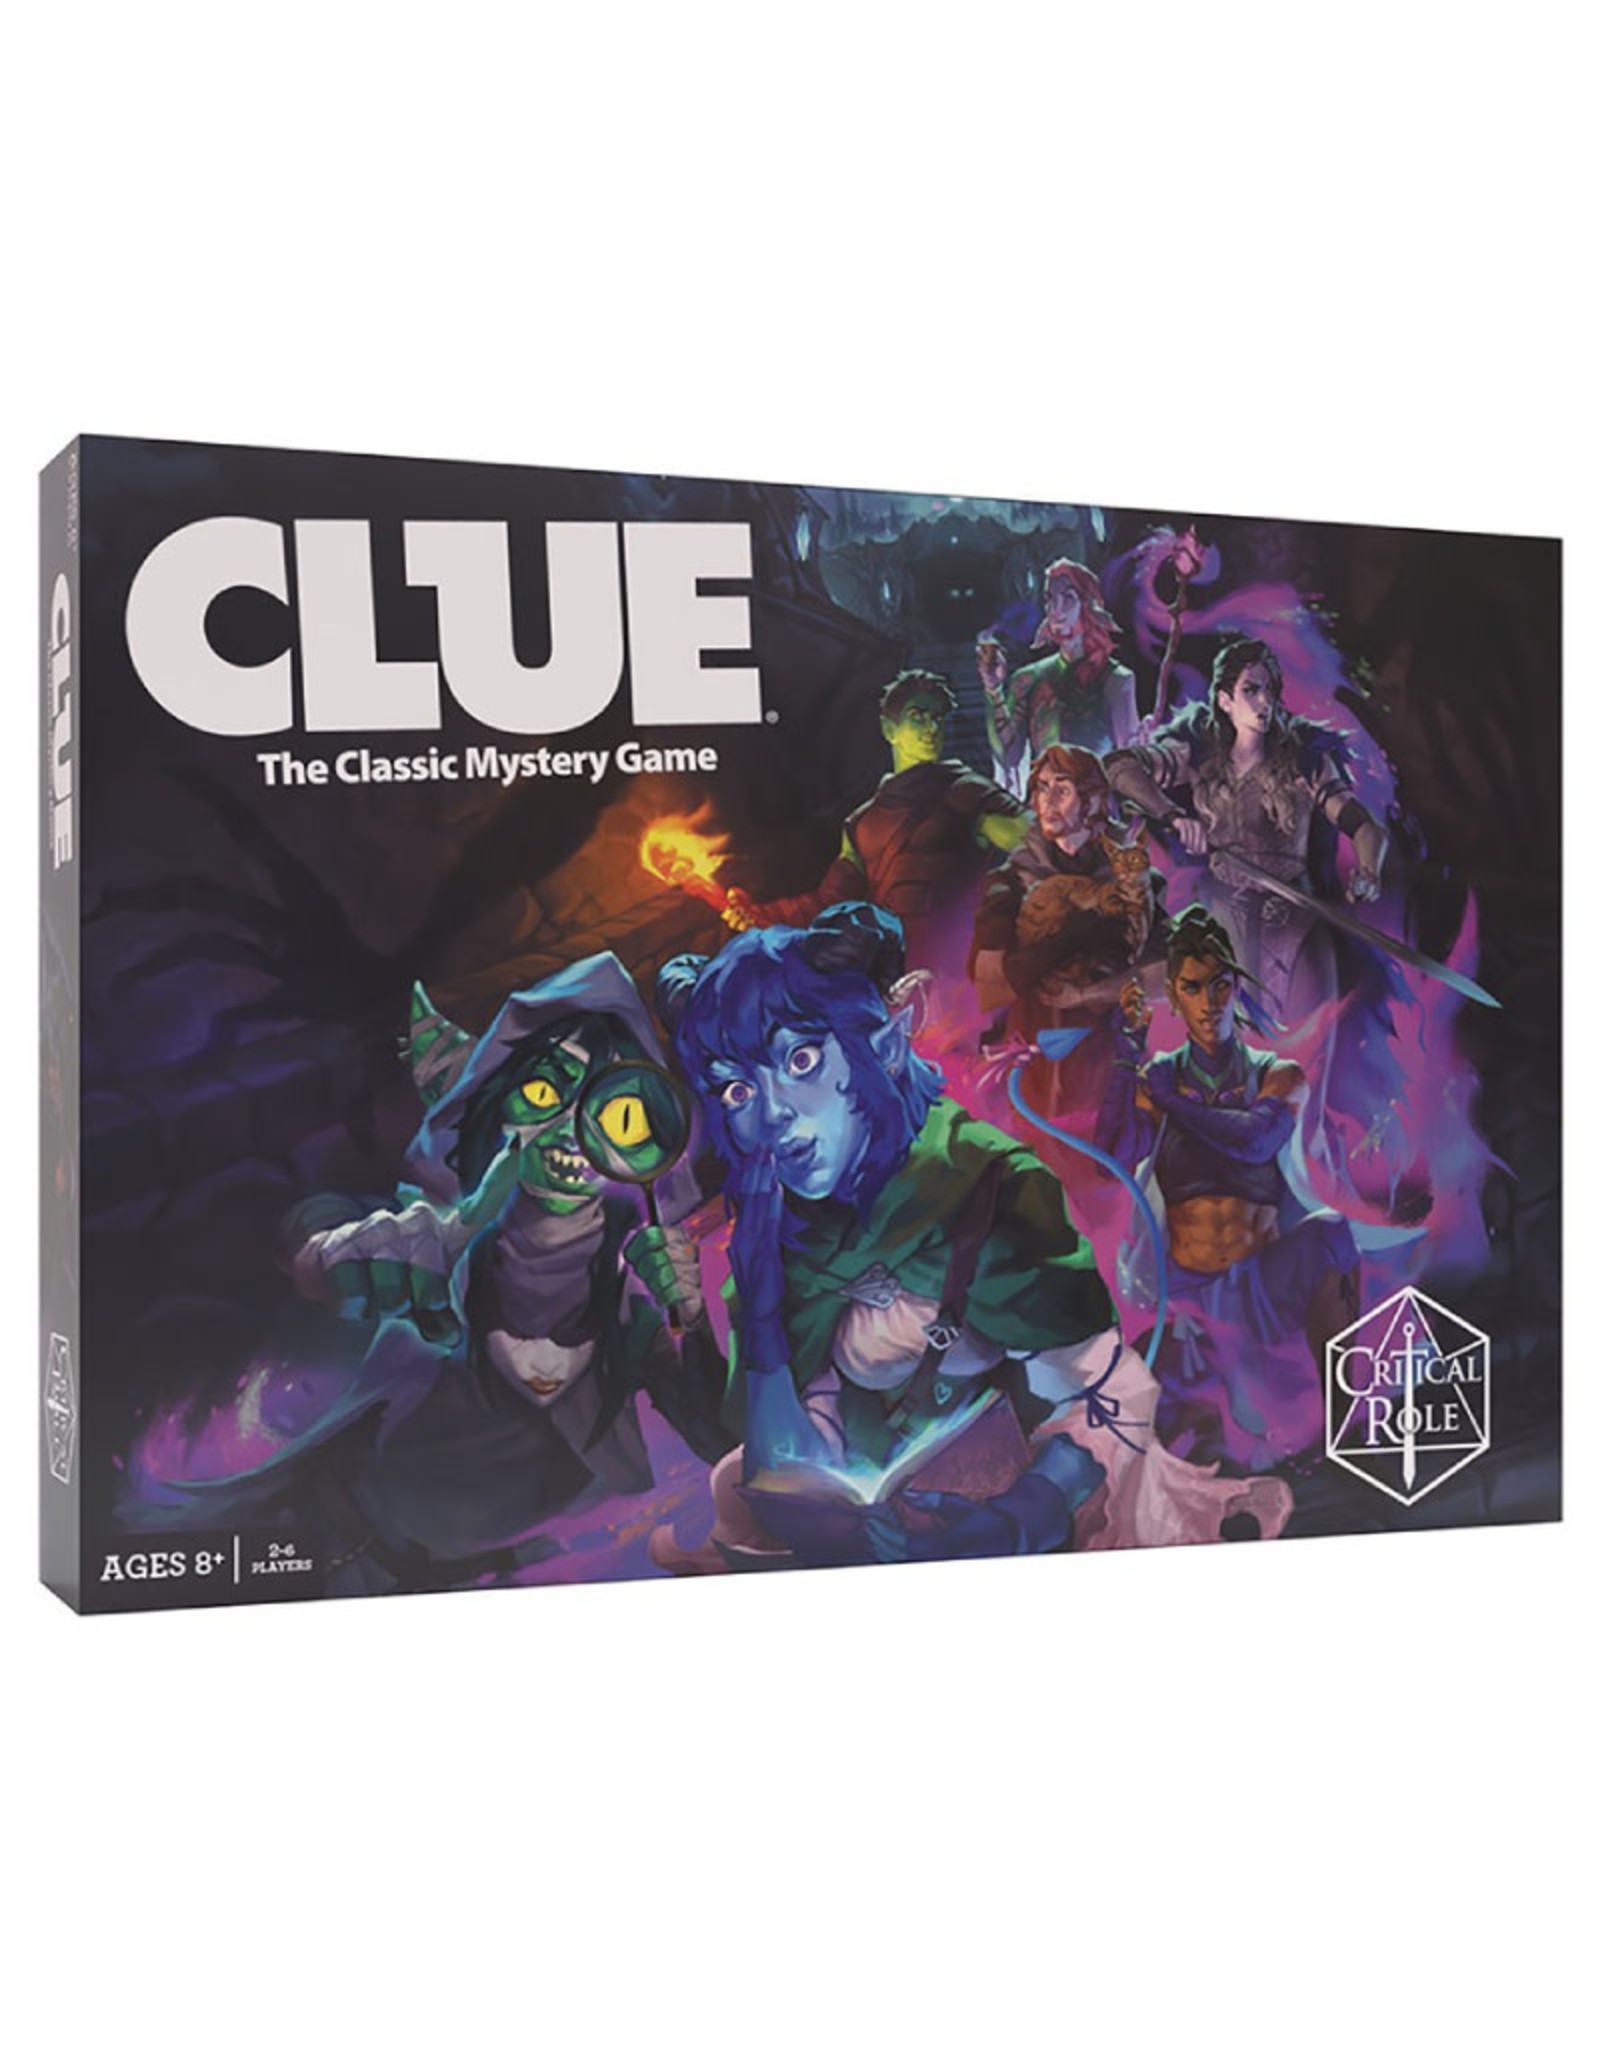 USAopoly Clue: Critical Role